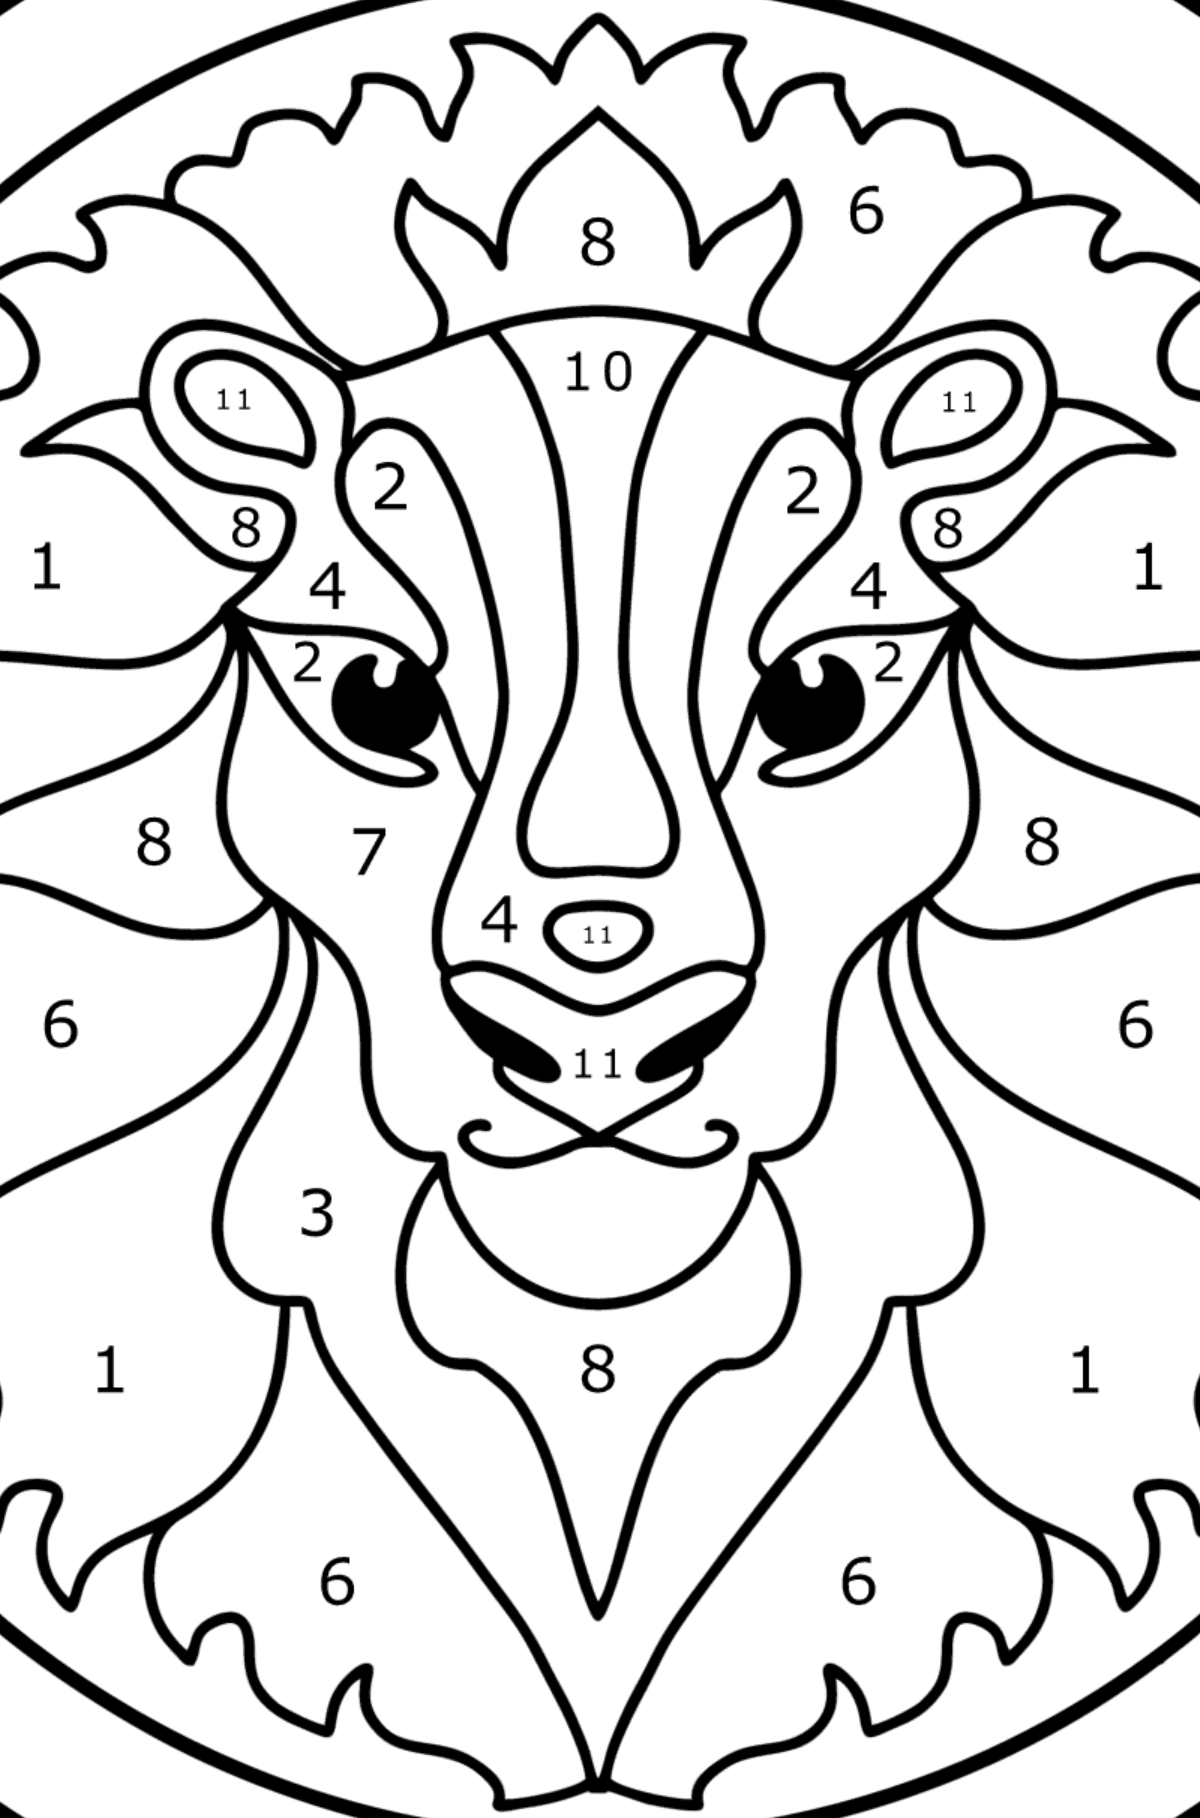 Coloring page for kids - zodiac sign Leo - Coloring by Numbers for Kids